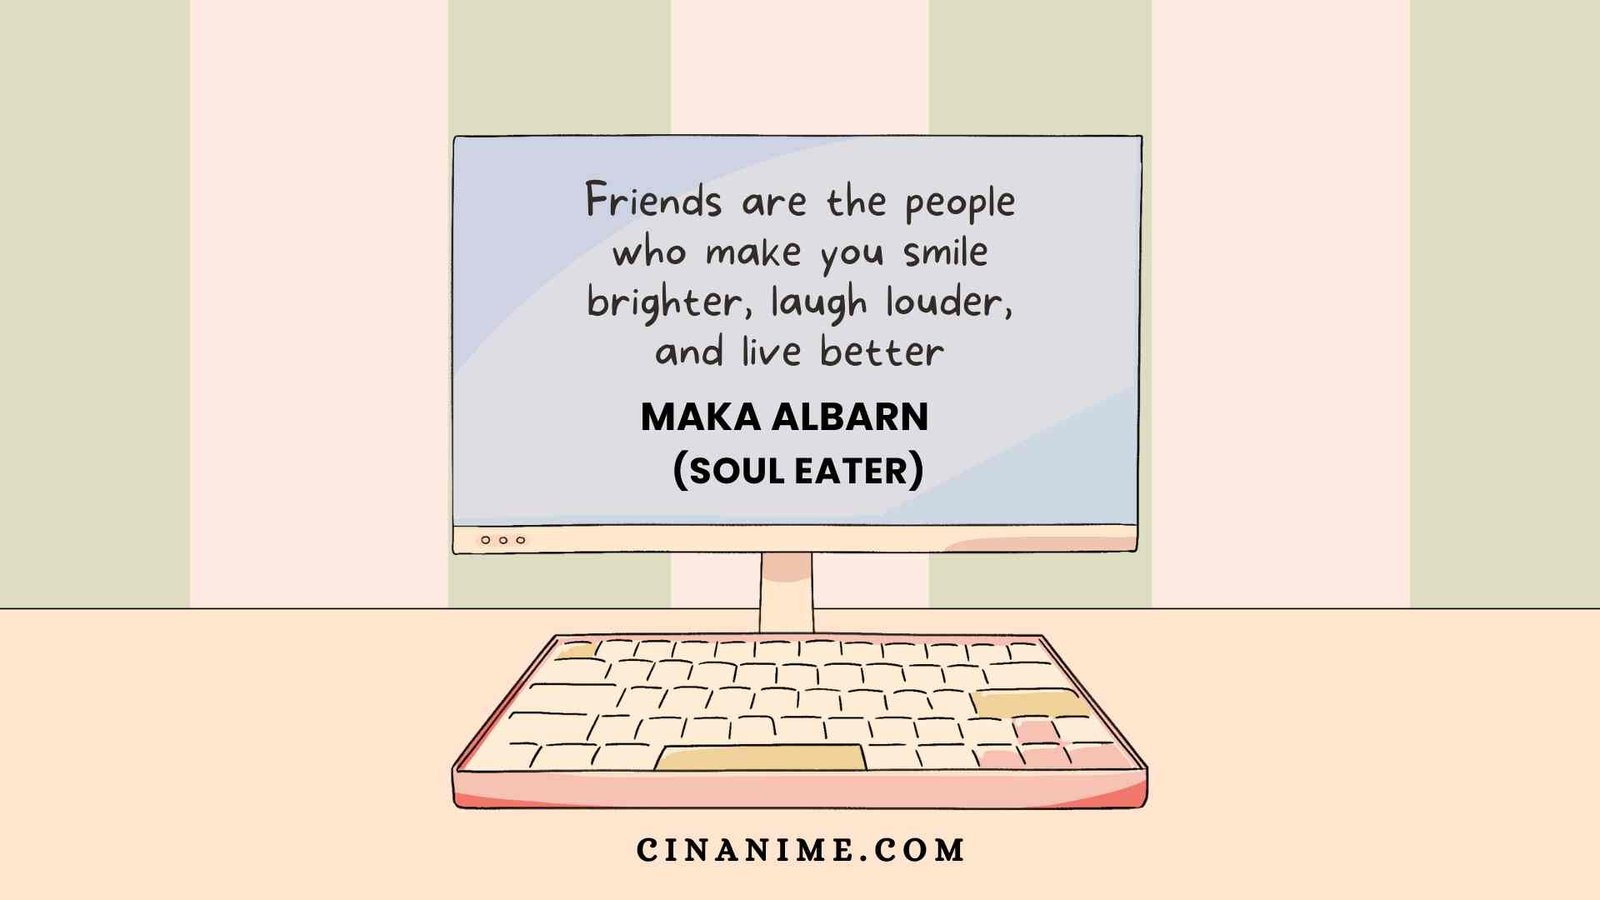 Anime Quotes about Friendship